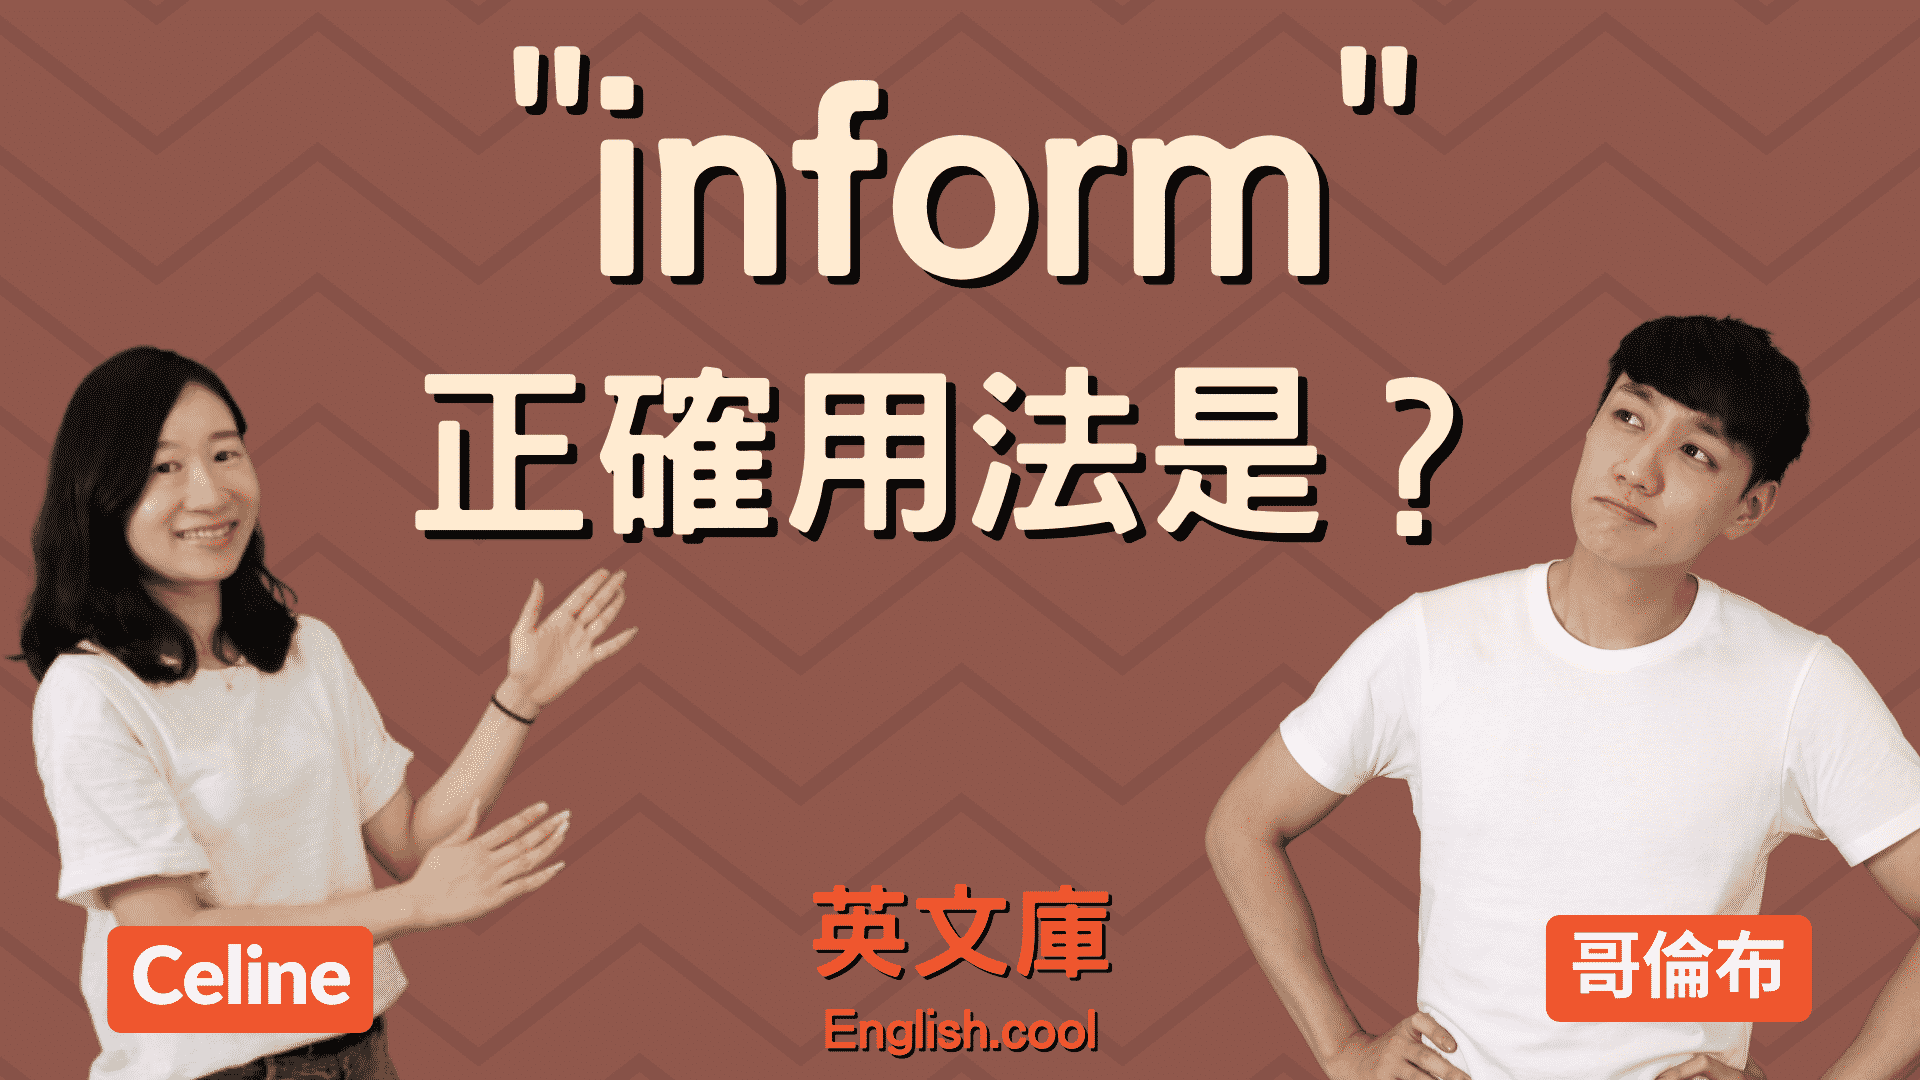 You are currently viewing Email 常見的「inform」正確用法是？來看例句搞懂！